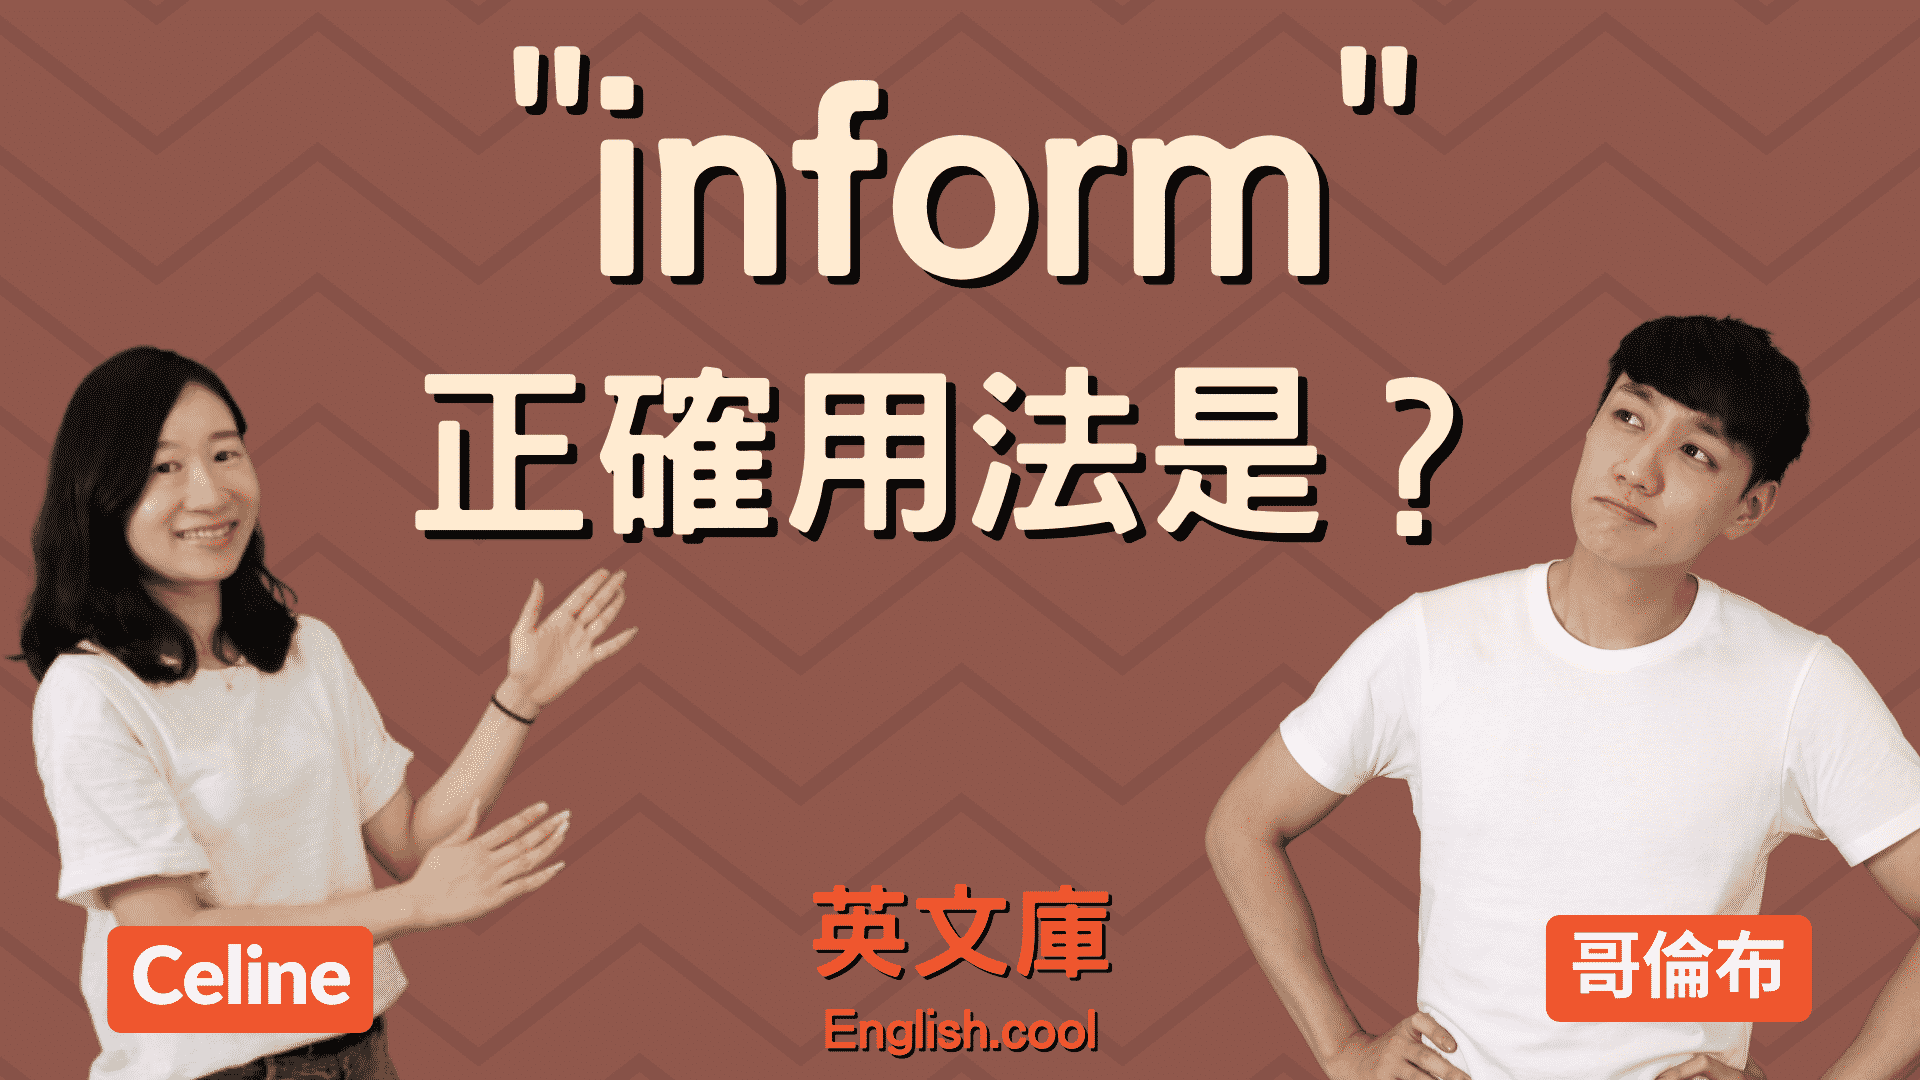 You are currently viewing Email 常見的「inform」正確用法是？來看例句搞懂！